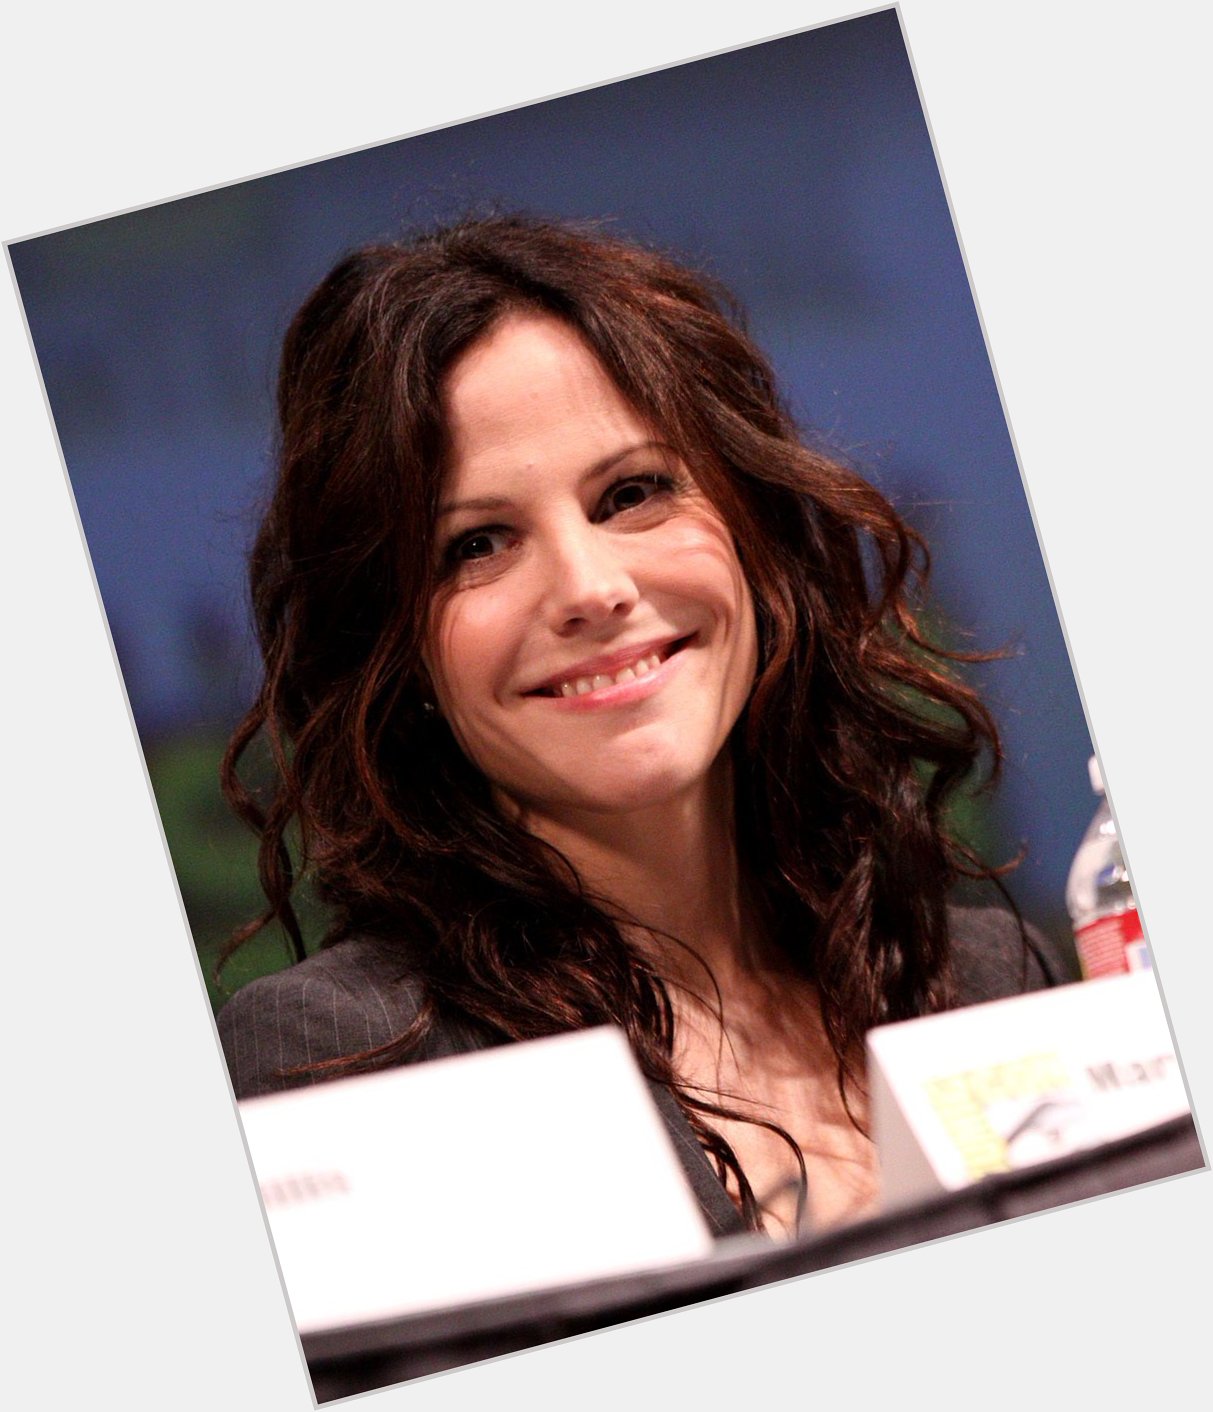 We wish a very Happy Birthday to Mary-Louise Parker Gage Skidmore - CC BY-SA 3.0 